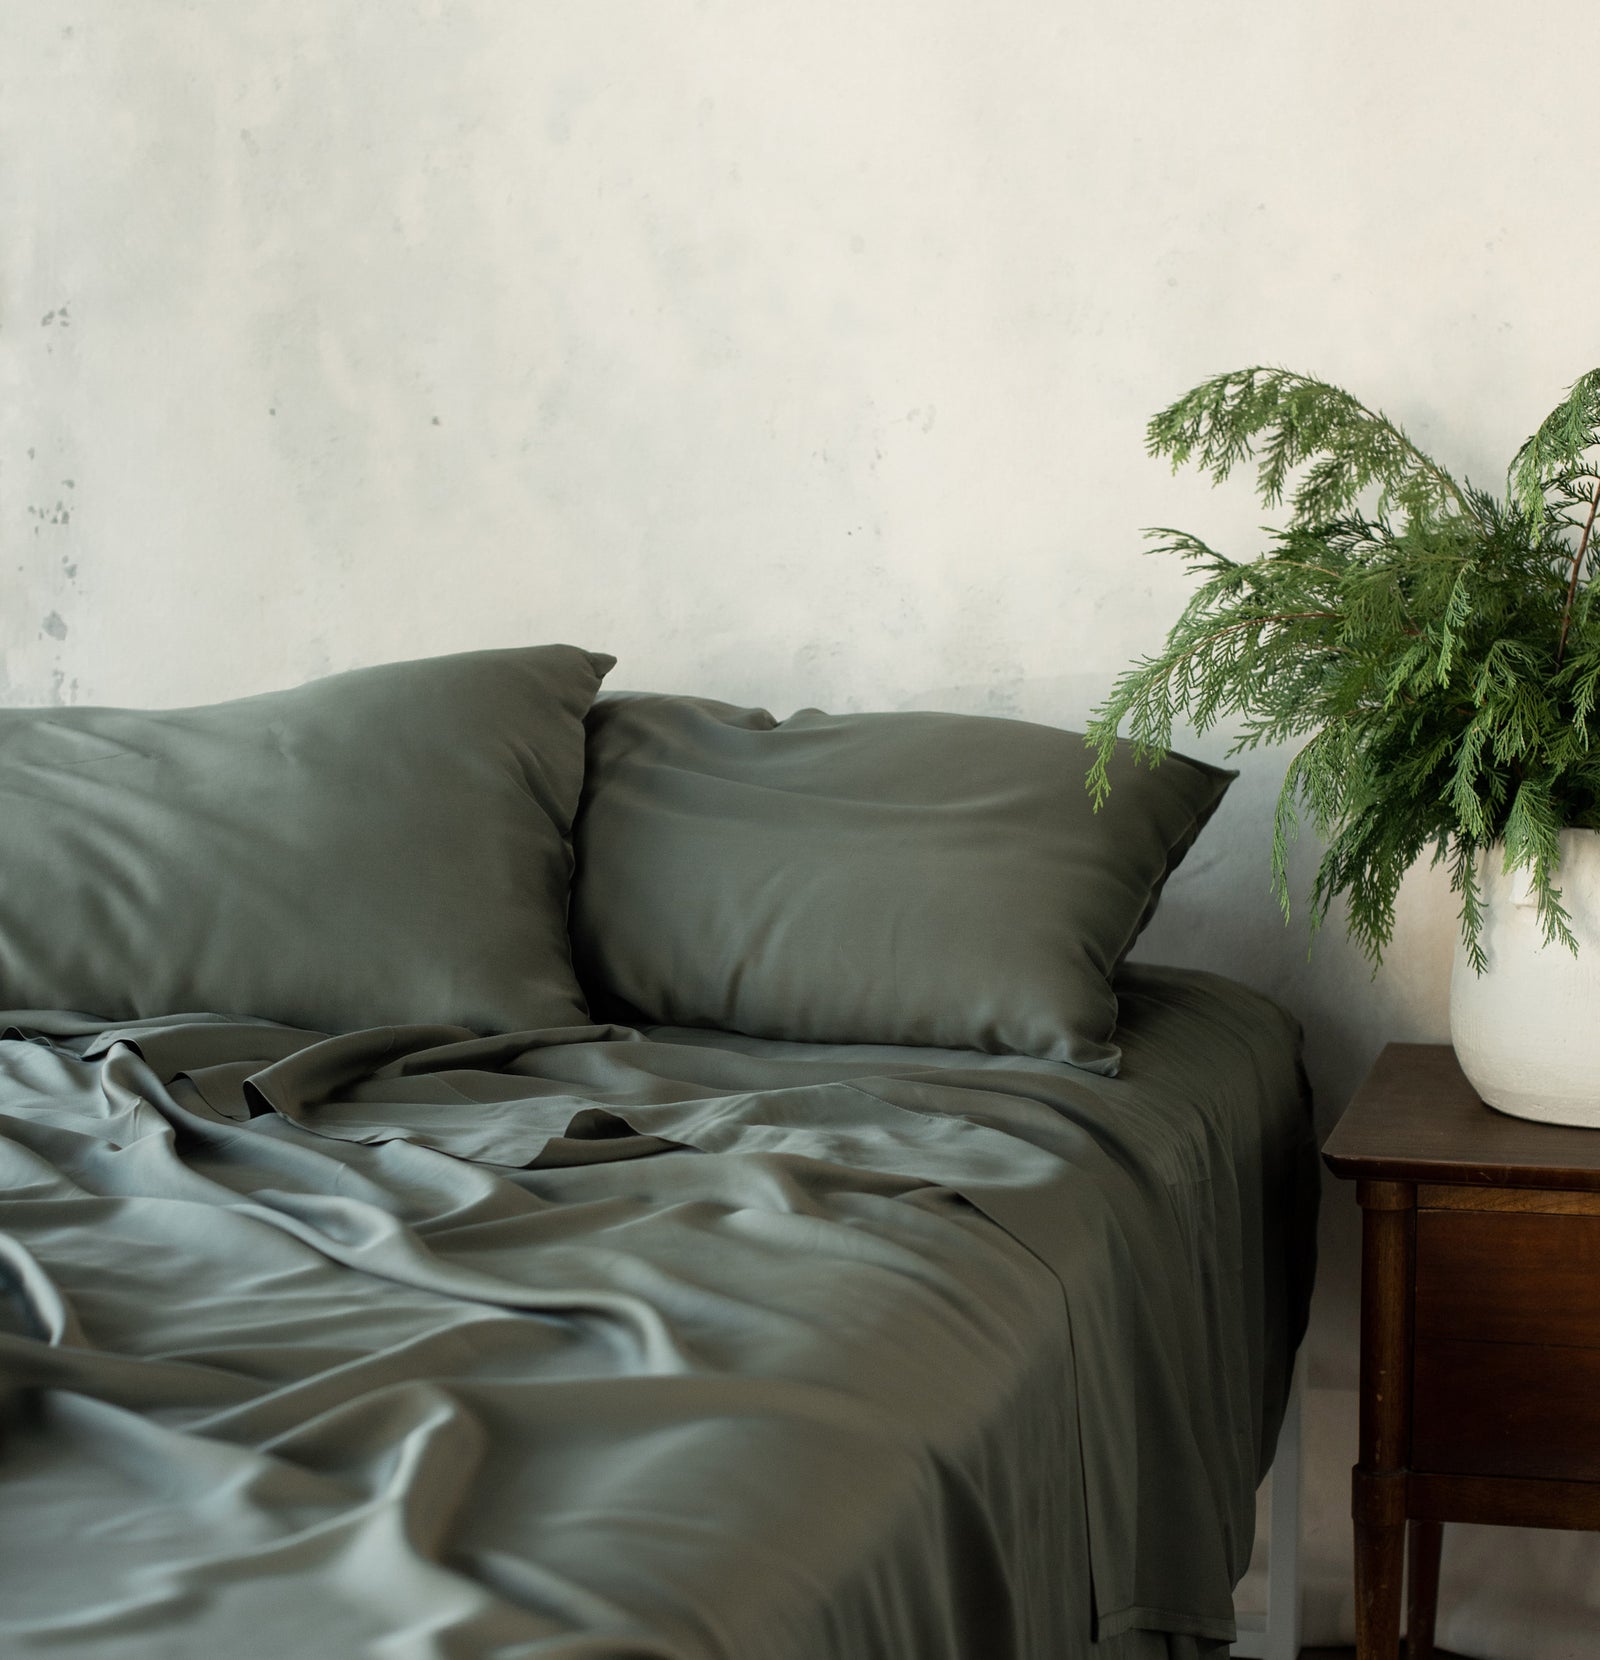 Unmade bed with olive bedding 